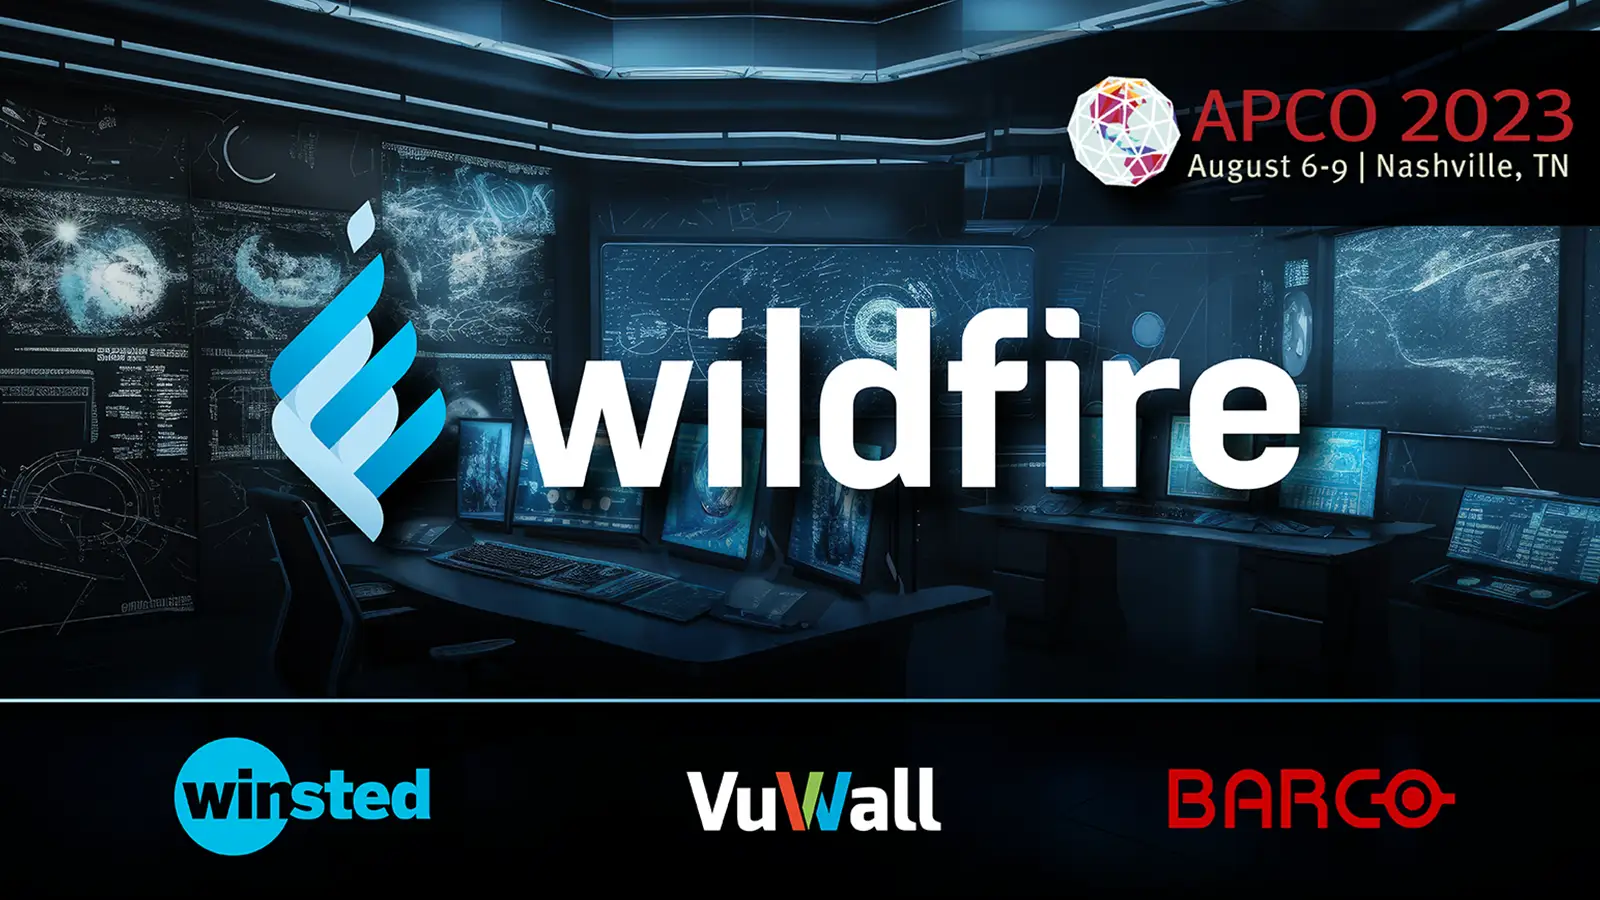 Wildfire Technology Exhibits at APCO 2023